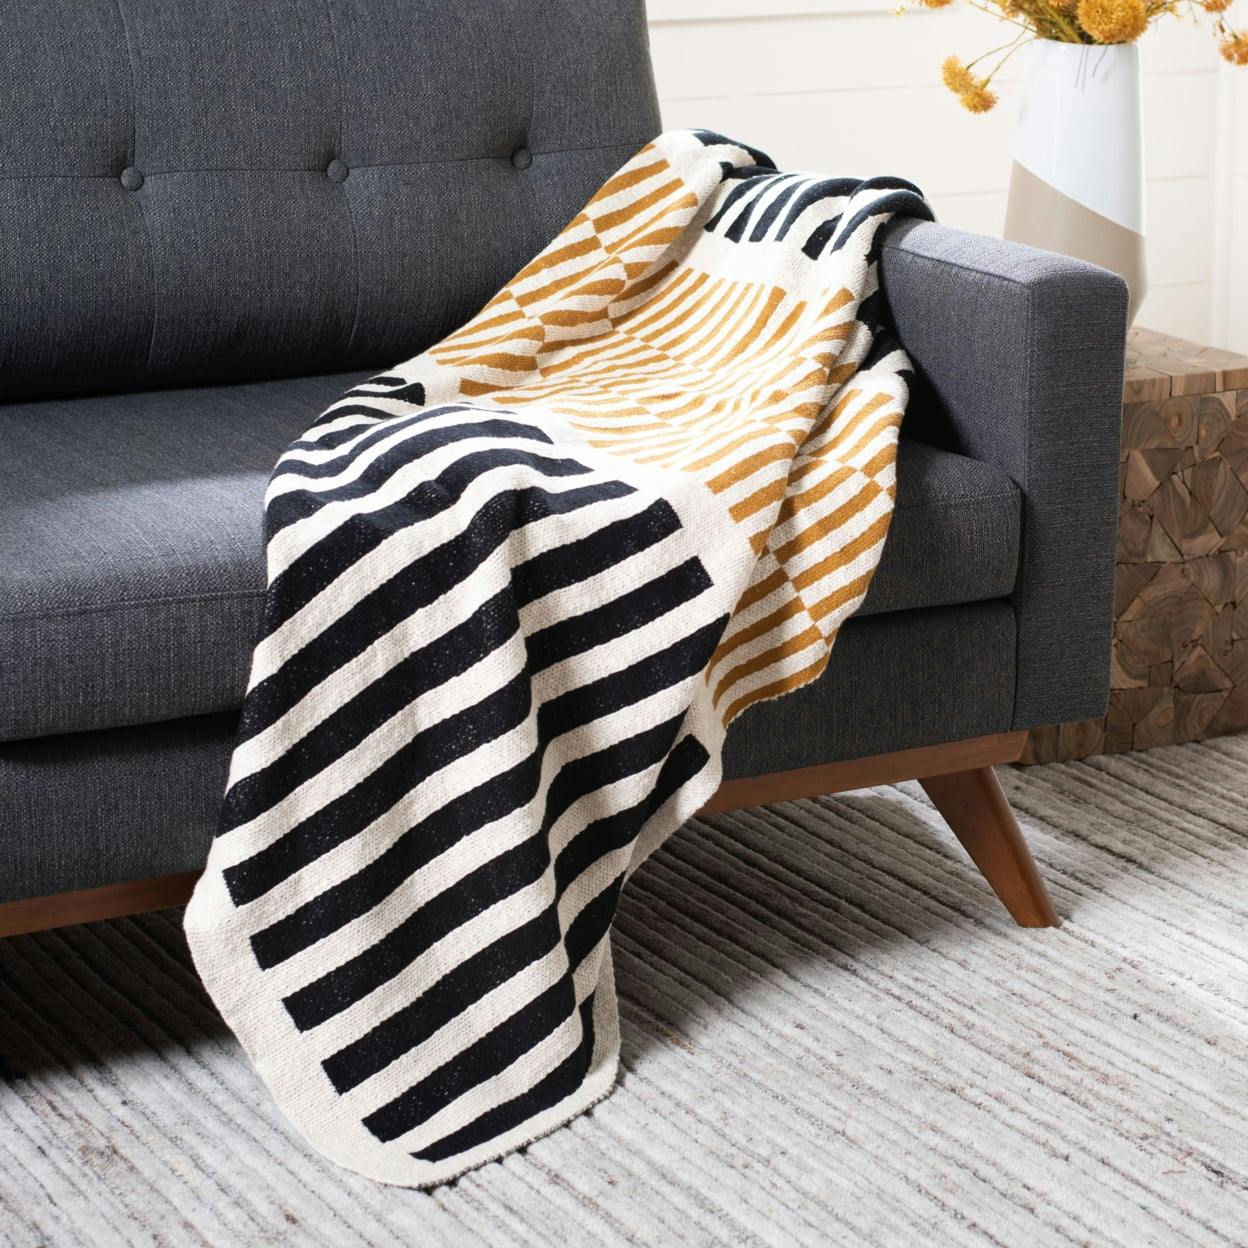 Lupin Mustard and Black Striped Cotton Knitted Throw Blanket